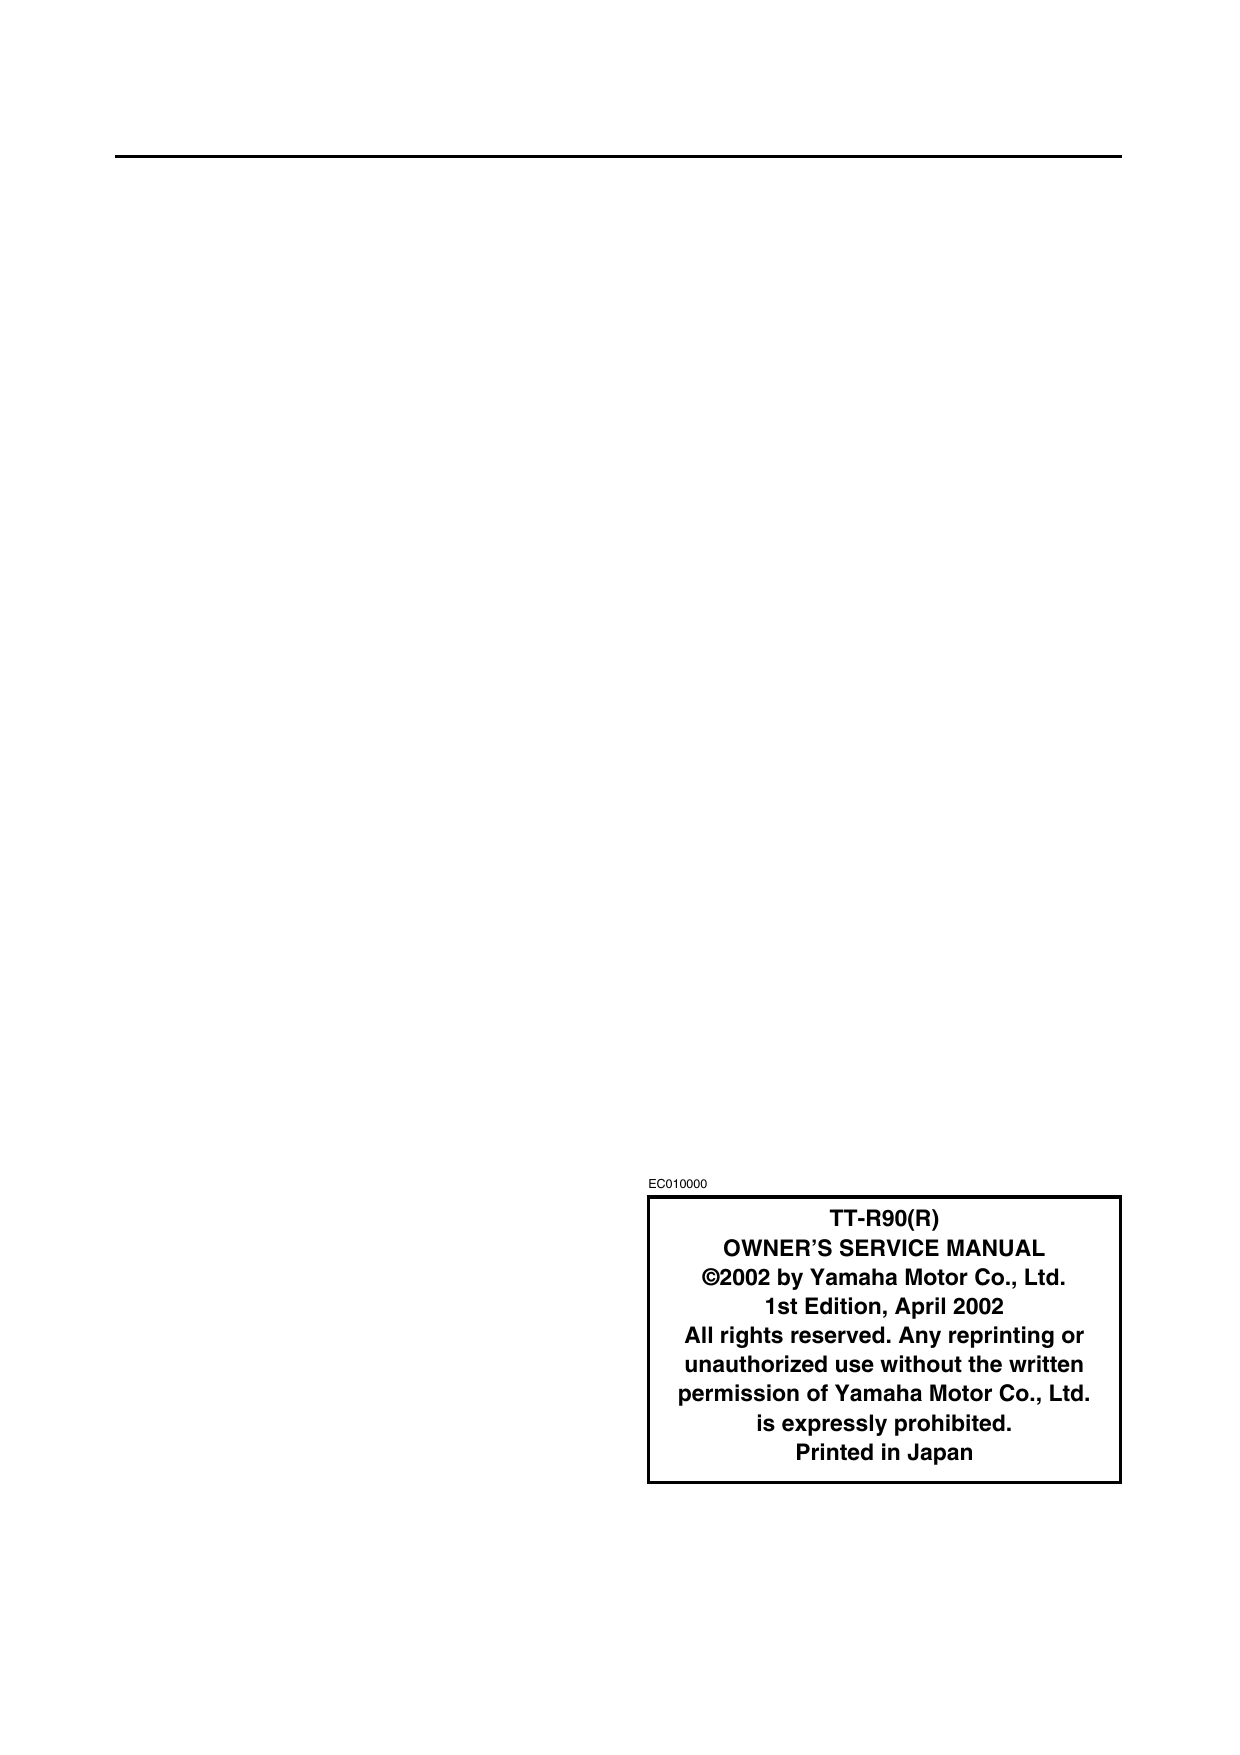 2003-2006 Yamaha TTR-90, TTR-90E repair and service manual Preview image 2